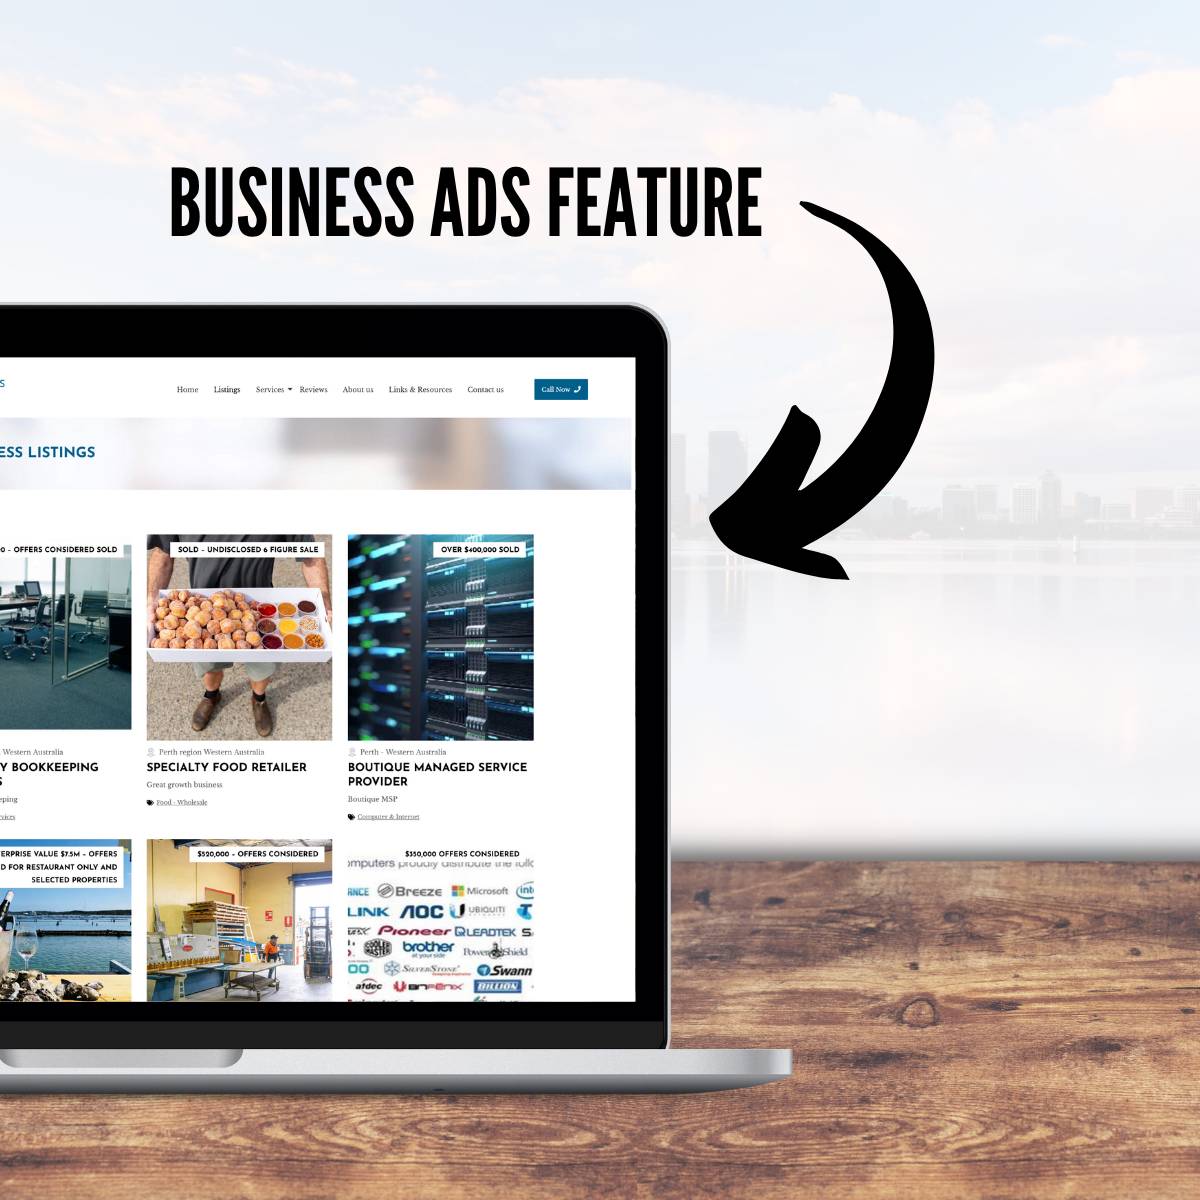 Business Ads Feature